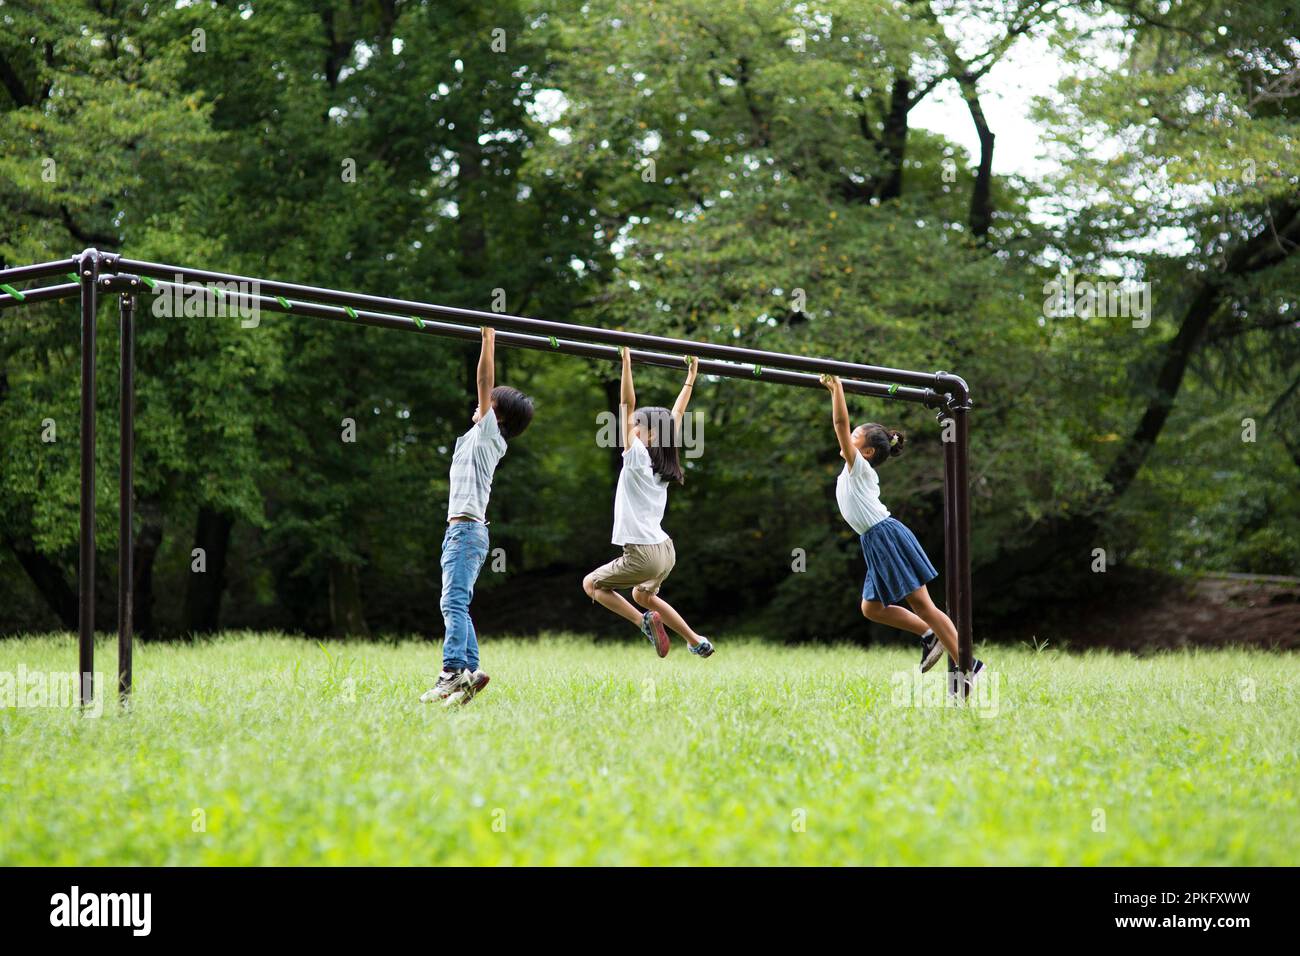 Elementary school children playing with a cloud ladder Stock Photo